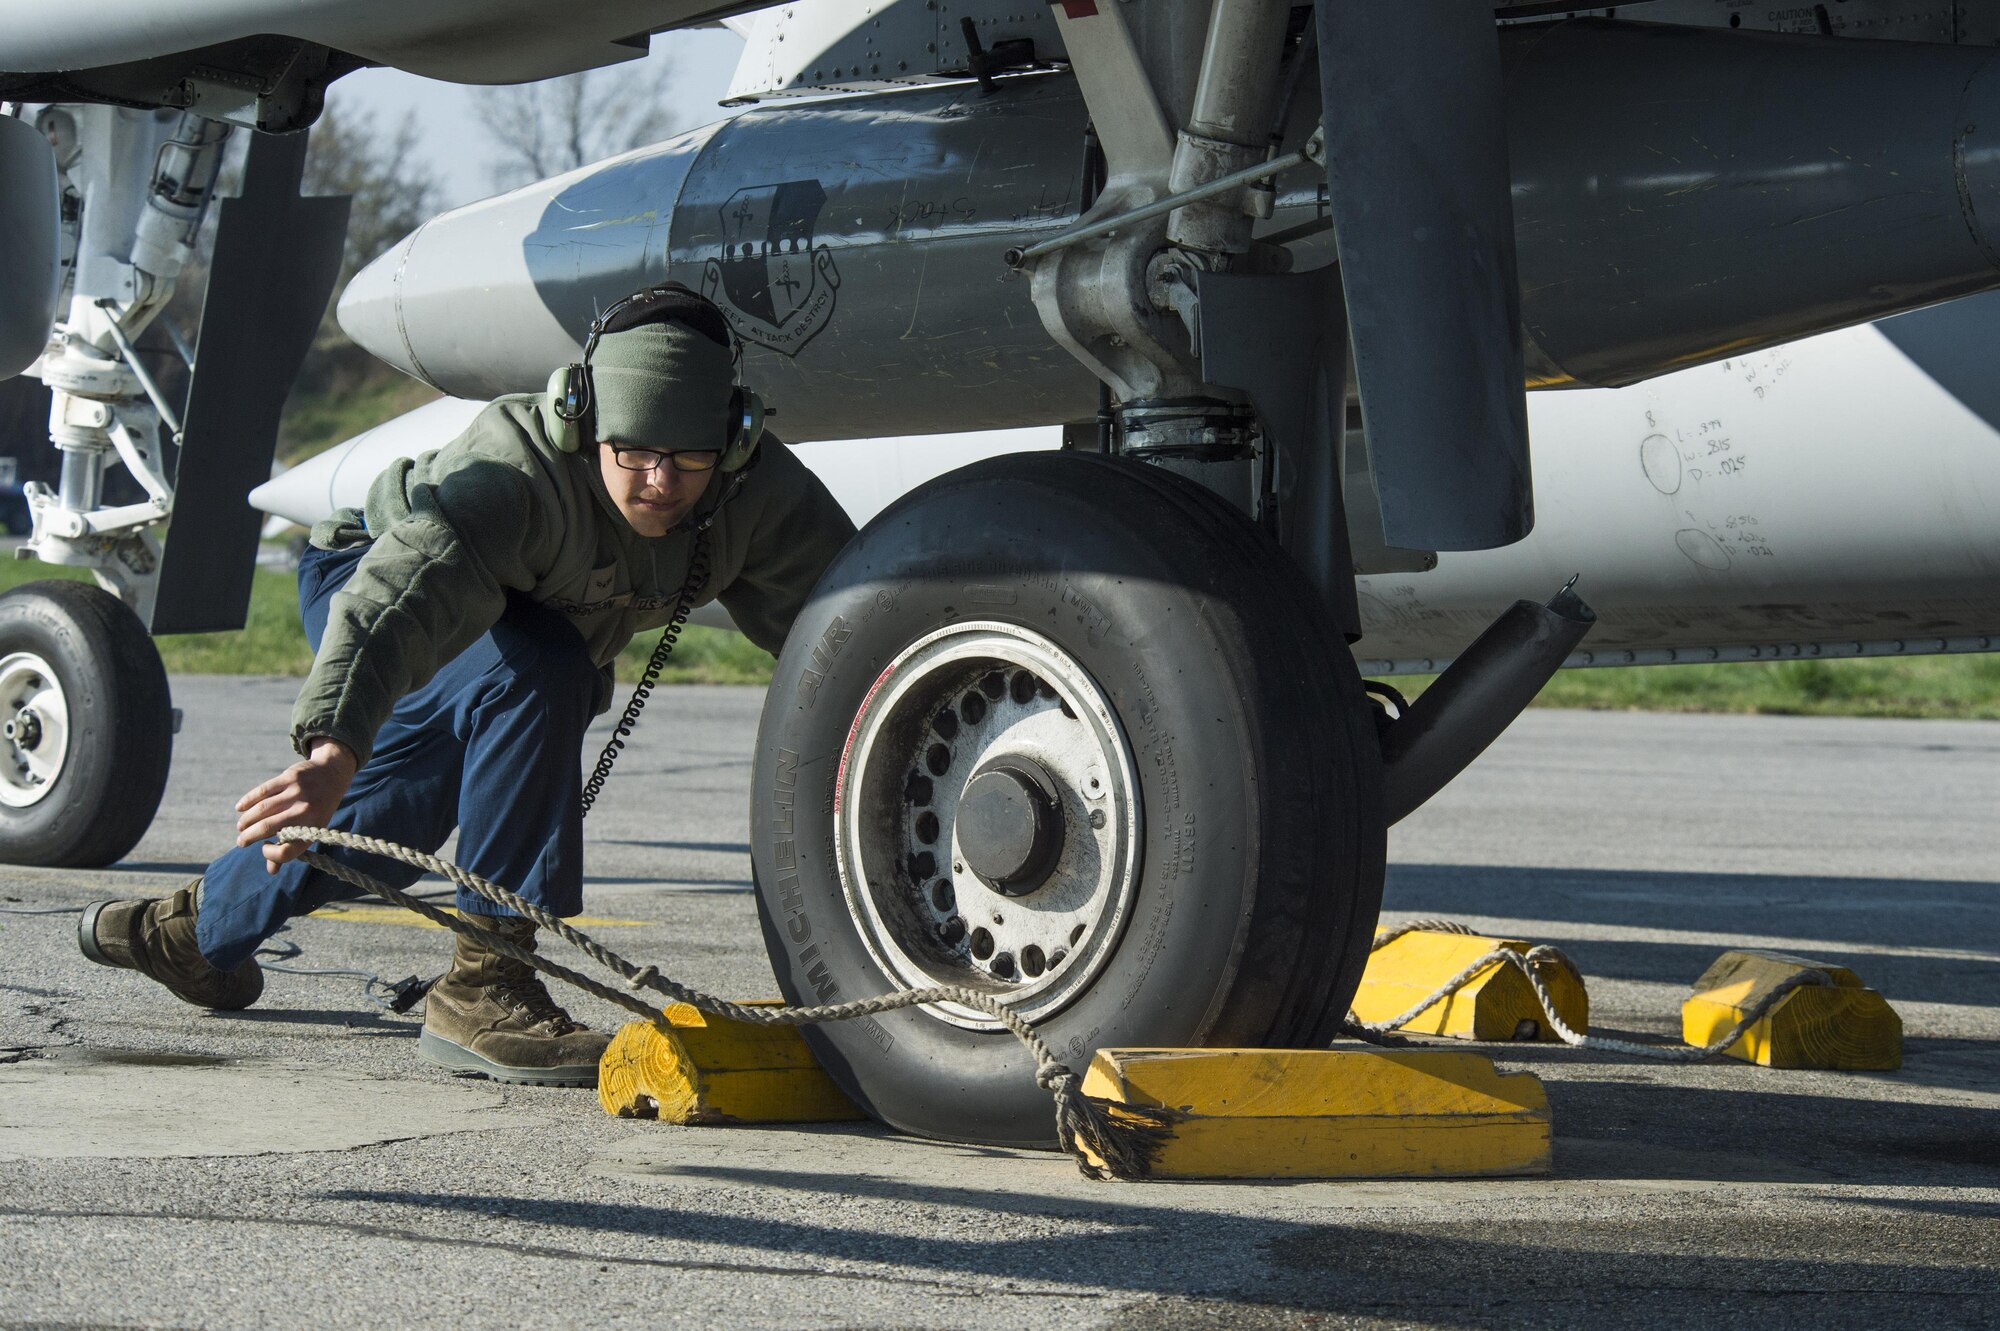 U.S. Air Force Airman 1st Class Jacob Johnson, 74th Expeditionary Fighter Squadron crew chief, removes the blocks from the wheels of an A-10 Thunderbolt II during the 74th EFS’s deployment in support of Operation Atlantic Resolve at Graf Ignatievo, Bulgaria, March 18, 2016. Johnson and his fellow 74th EFS crew chiefs ensure all aircraft are prepared and safe for flight before and after each flight. (U.S. Air Force photo by Staff Sgt. Joe W. McFadden/Released)